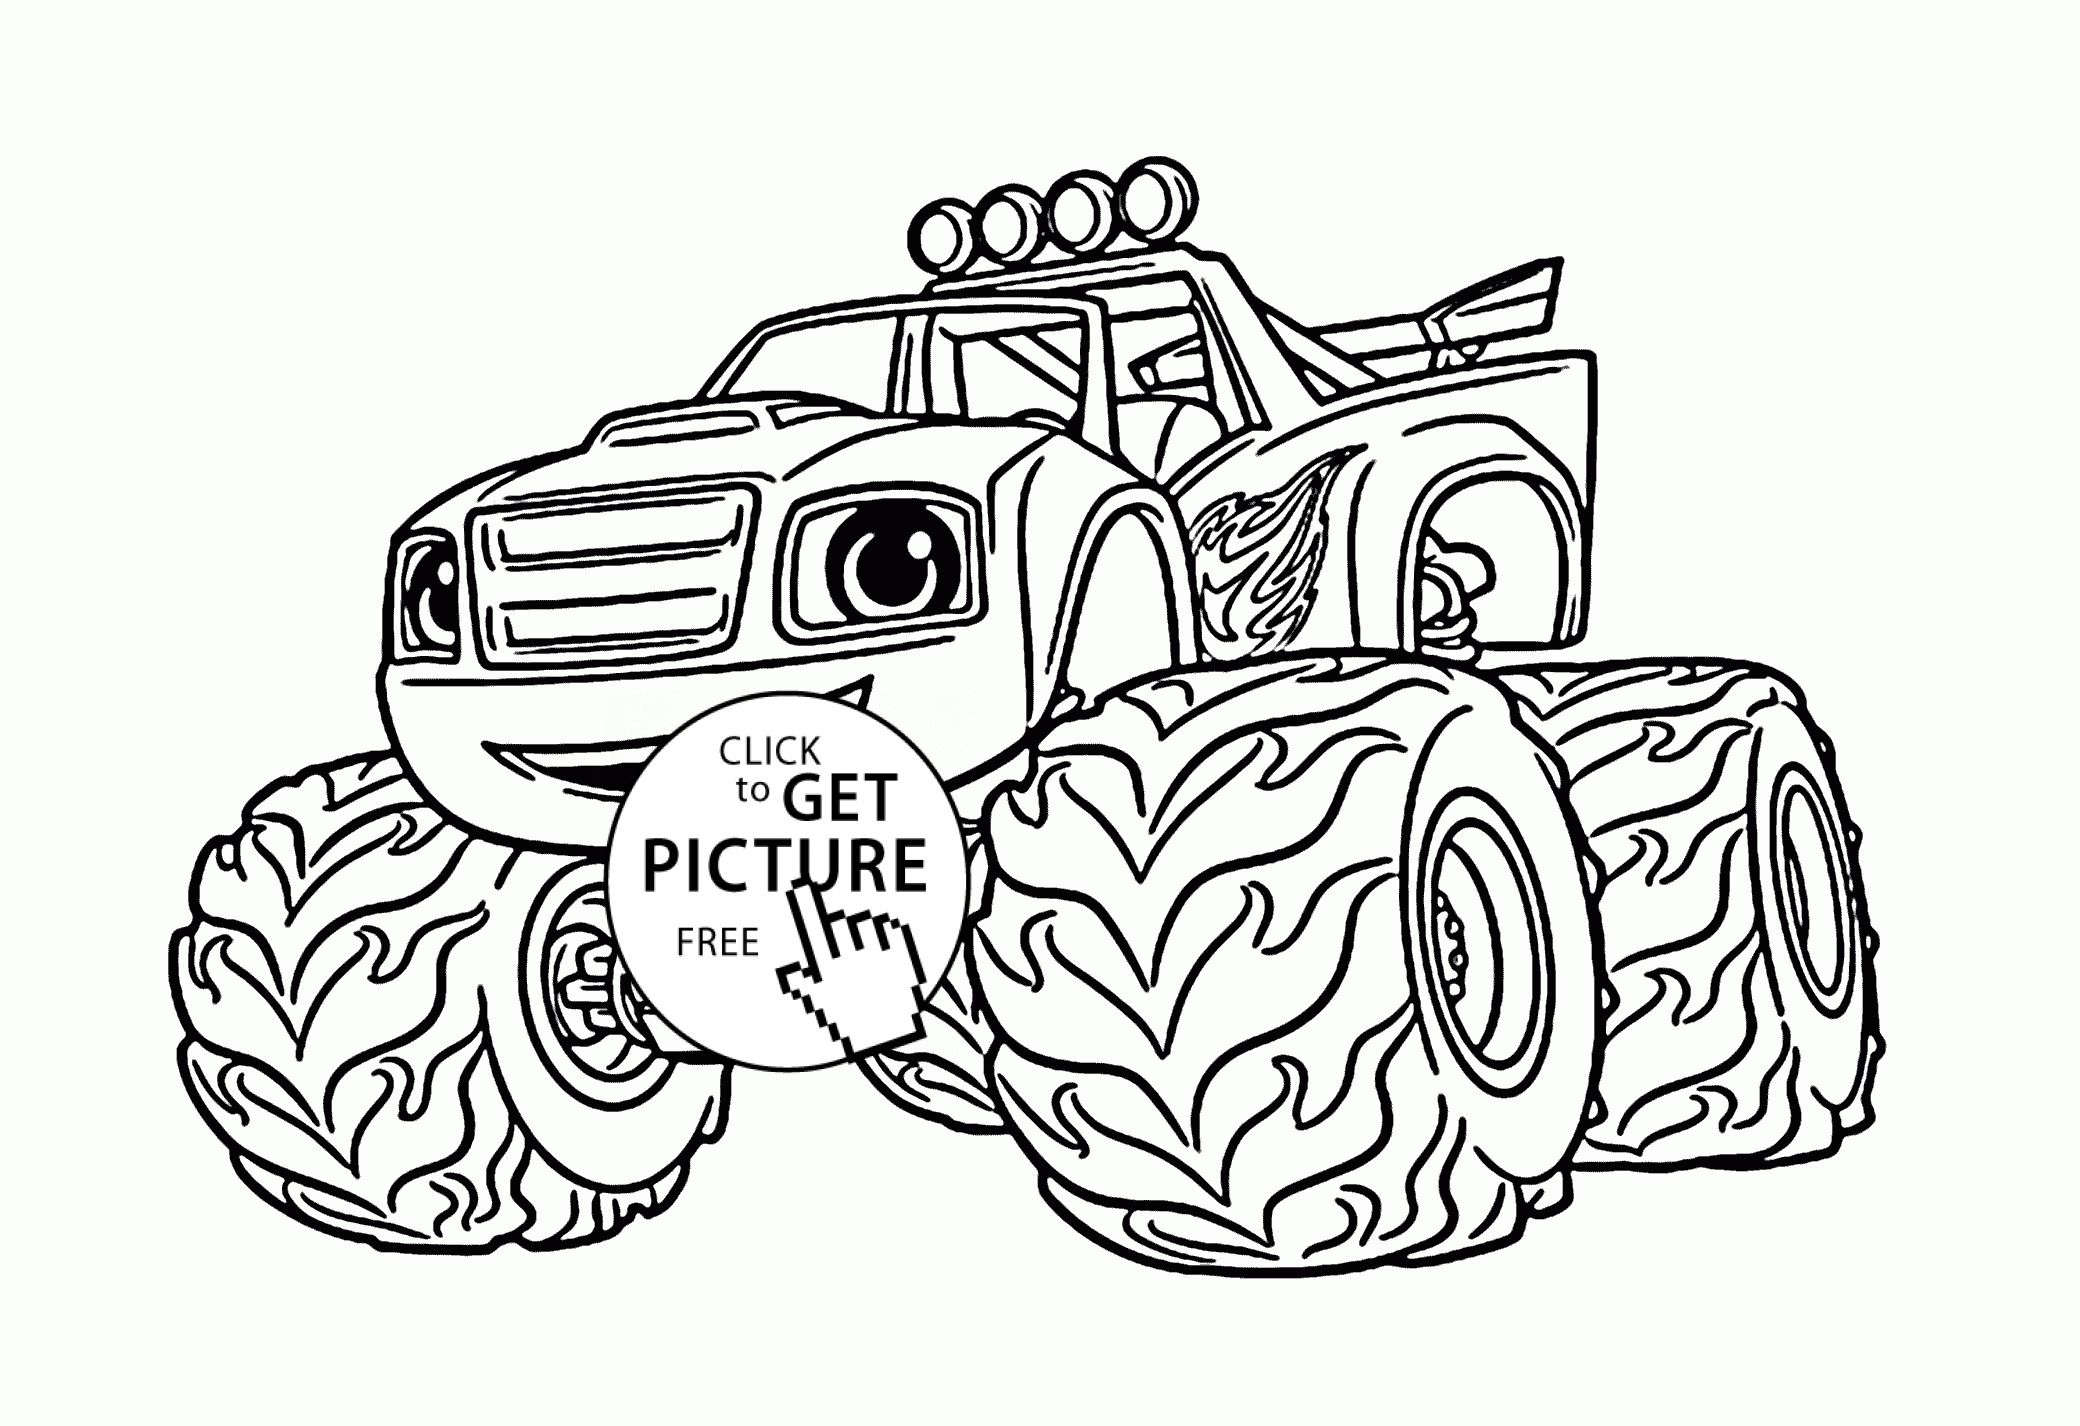 Blaze Monster Machine Coloring Pages at GetDrawings | Free download